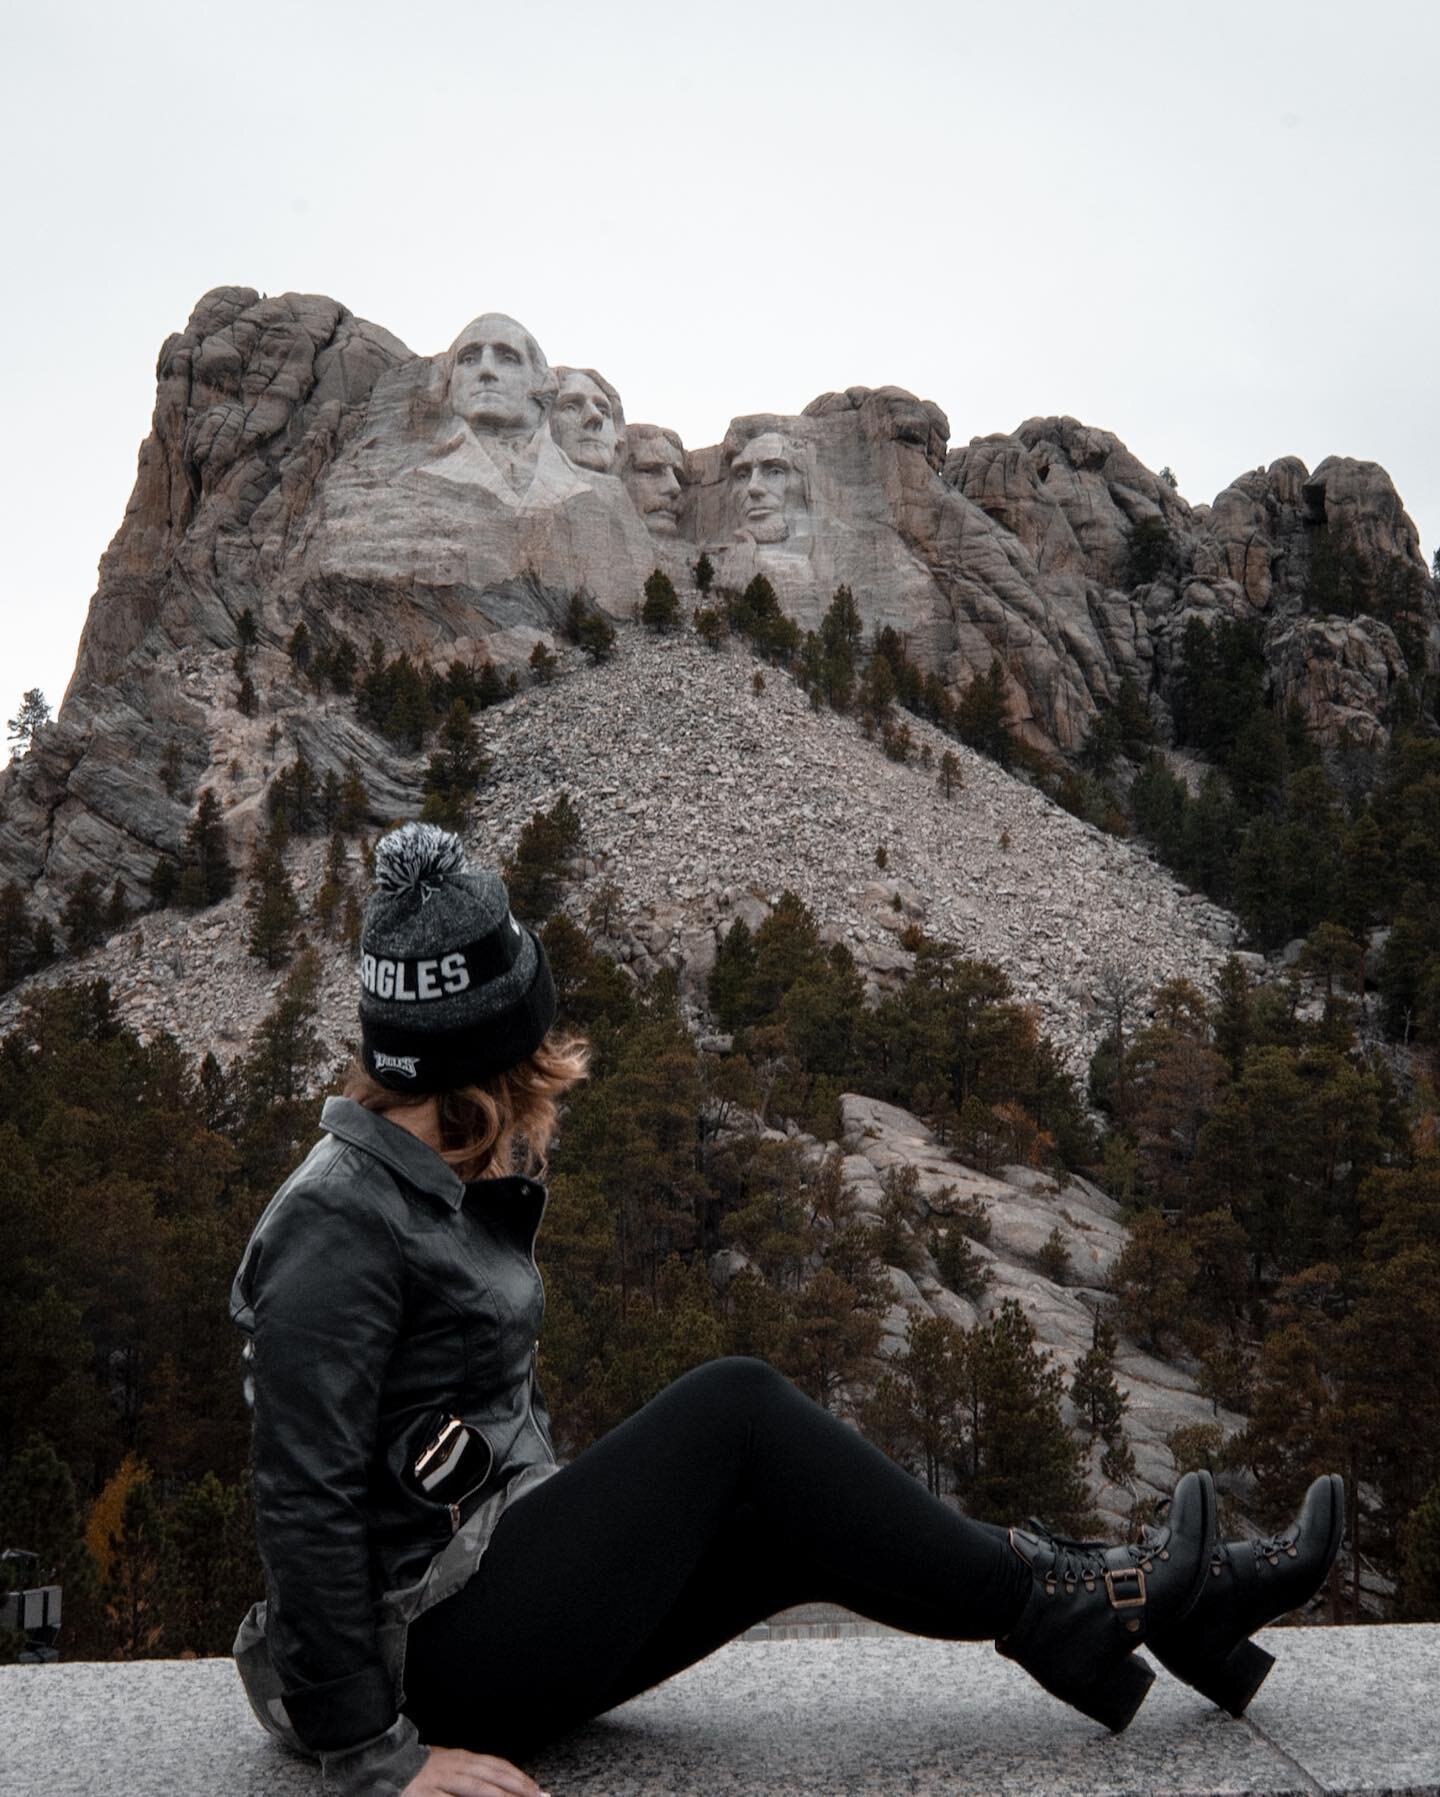 almost three years ago, i visited south dakota for the first time. it was supposed to be a means to an end, a necessary evil on the way to bigger and better things, but i completely fell in love with the state. the black hills is sacred land, and one